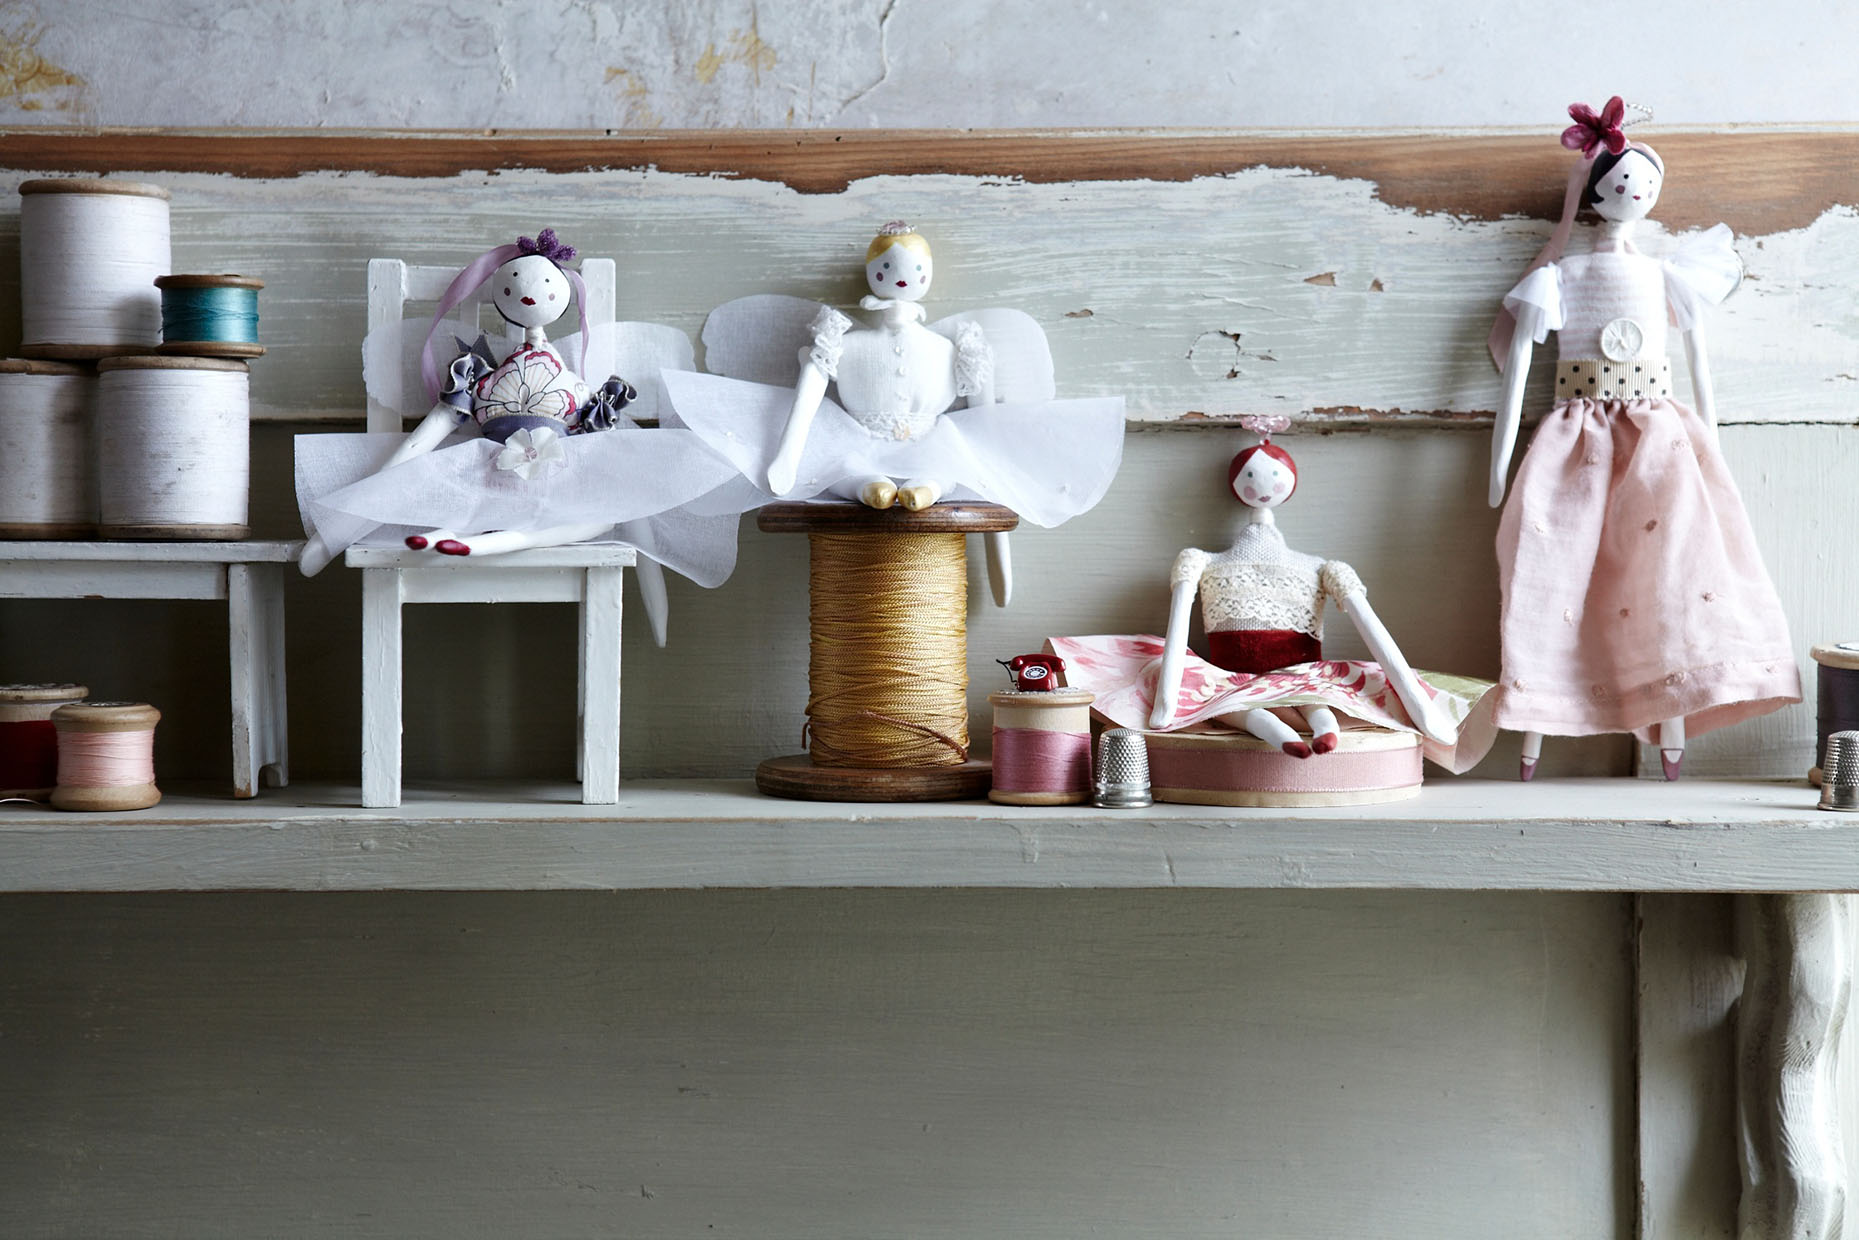 From the Homemade Home for Children by Sania Pell. Stylist Sania Pell, photographer Emma Lee.